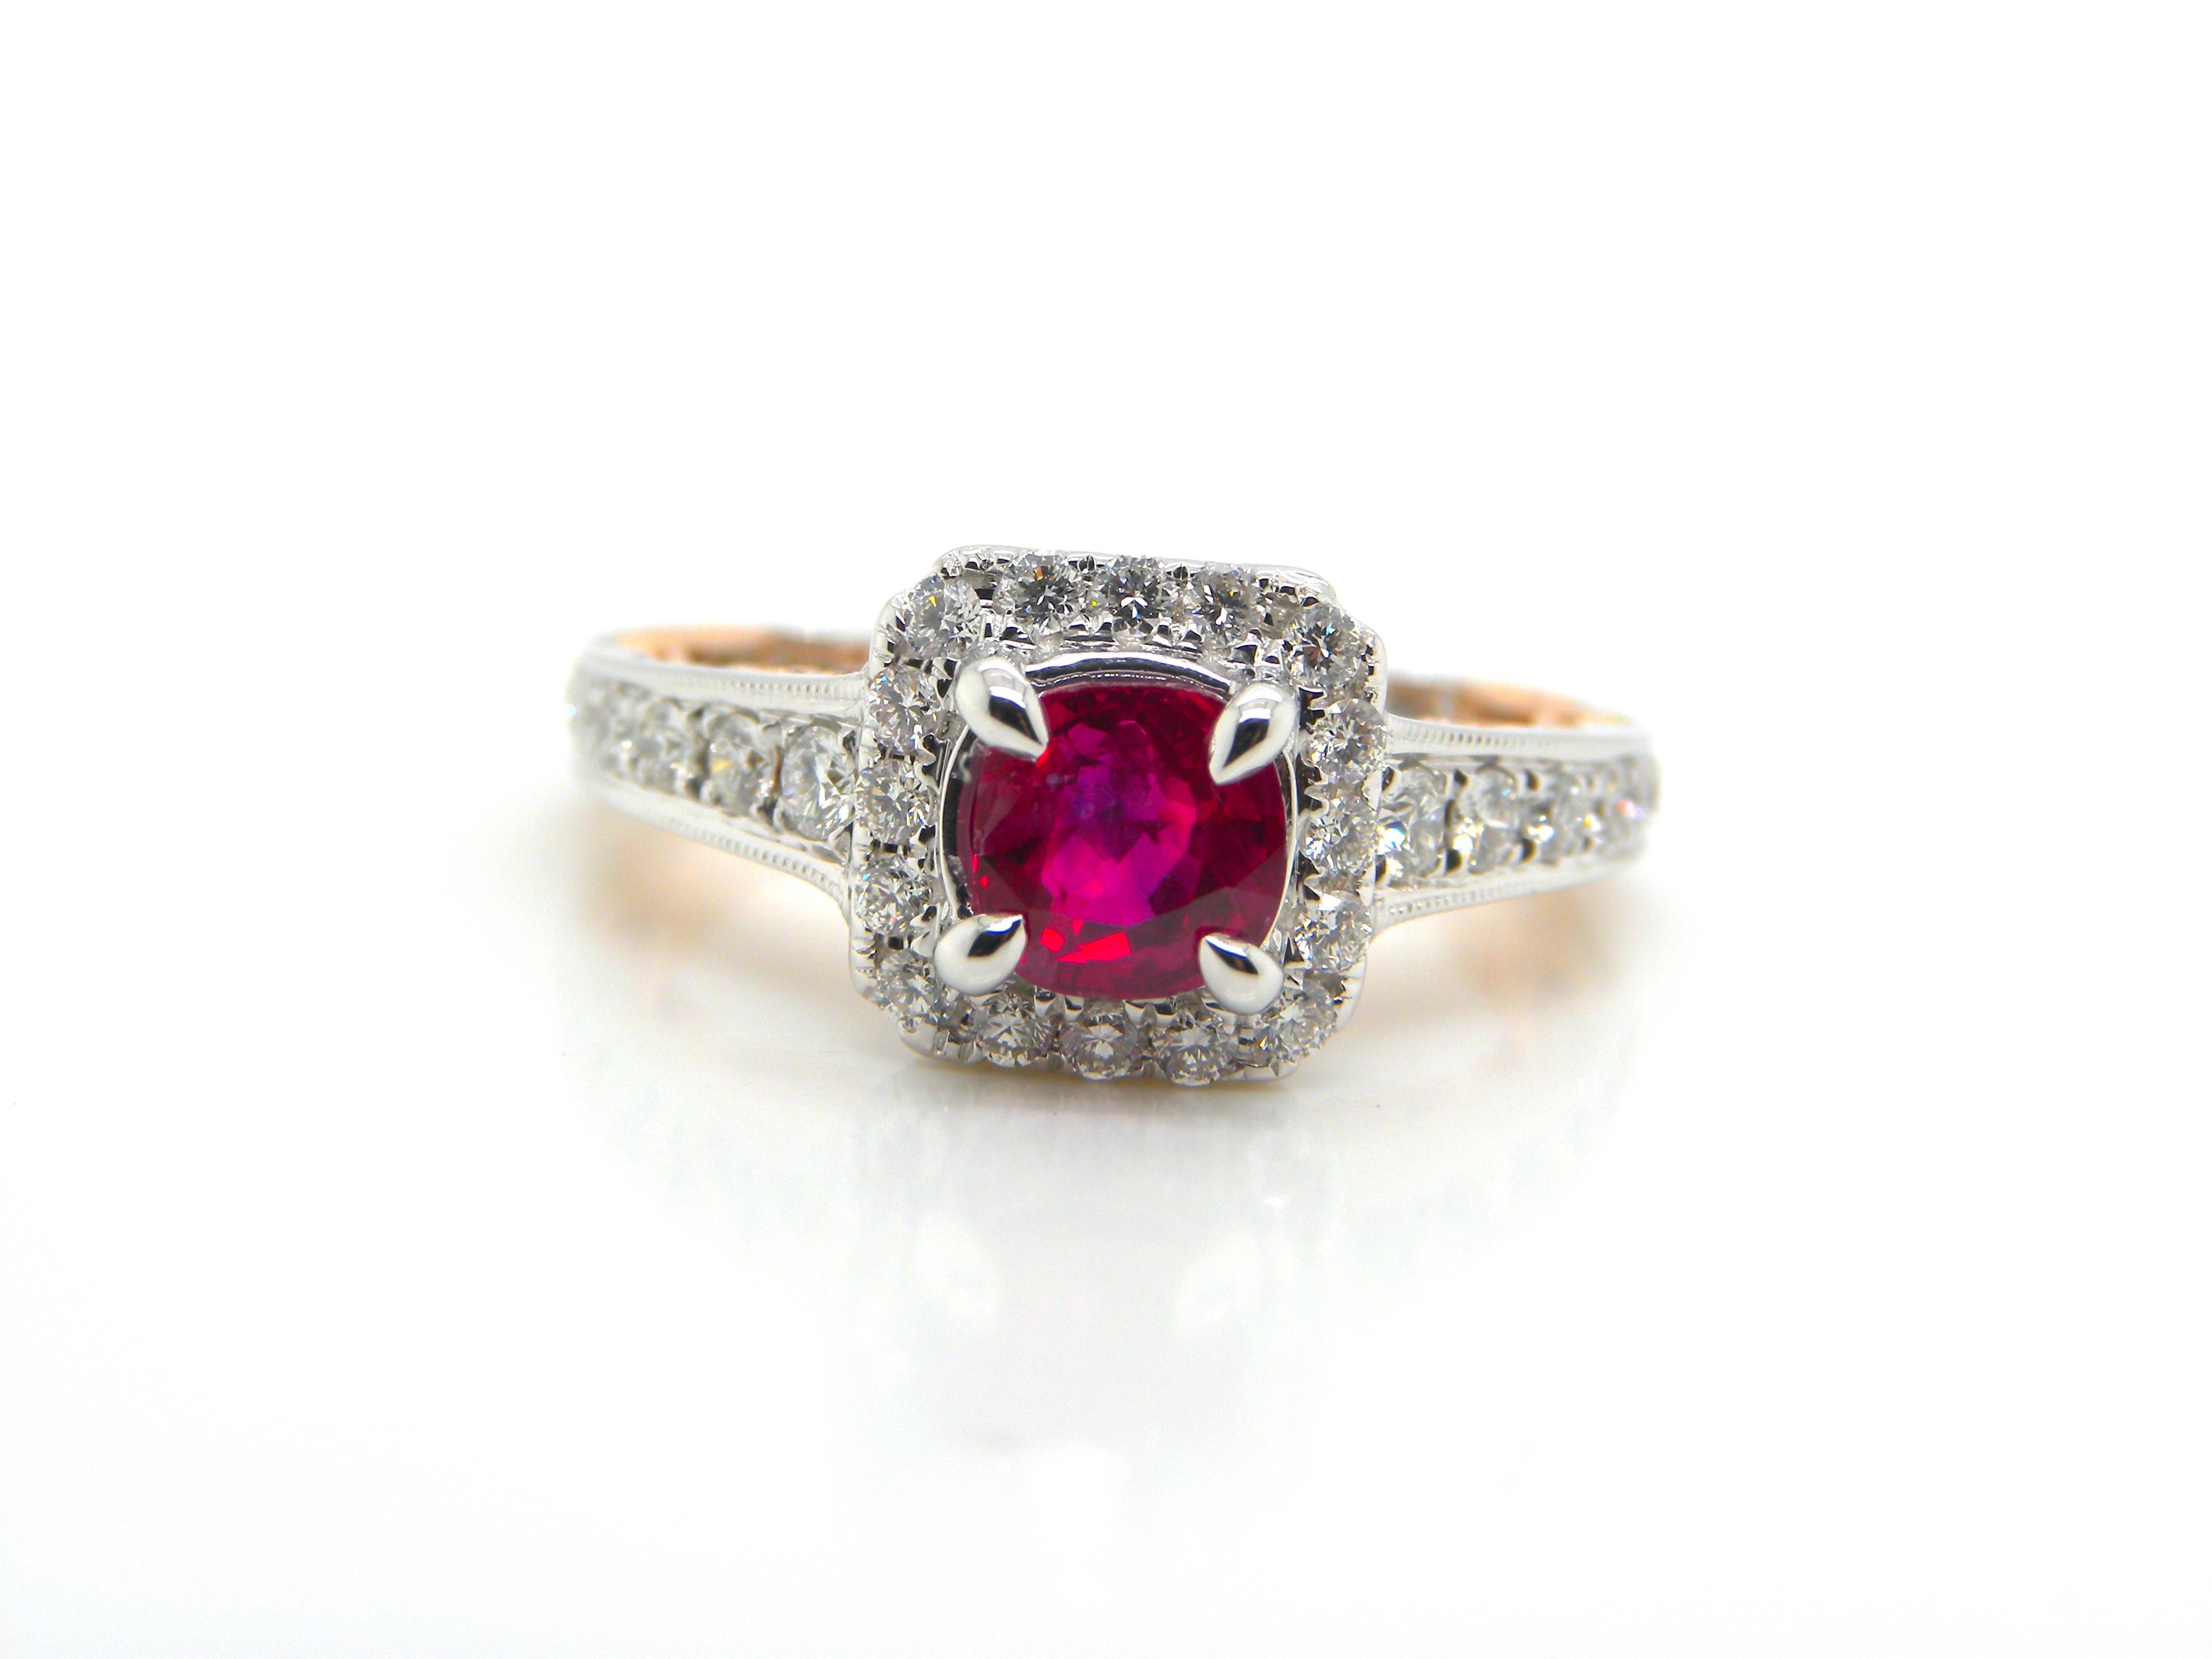 1 Carat LOTUS Certified Burma No Heat Pigeon's Blood Red Ruby and Diamond Ring:

A gorgeous ring, it features an unheated Burmese pigeon's blood red ruby weighing 1 carat, surrounded by white round brilliant diamonds extending upto the ring shank